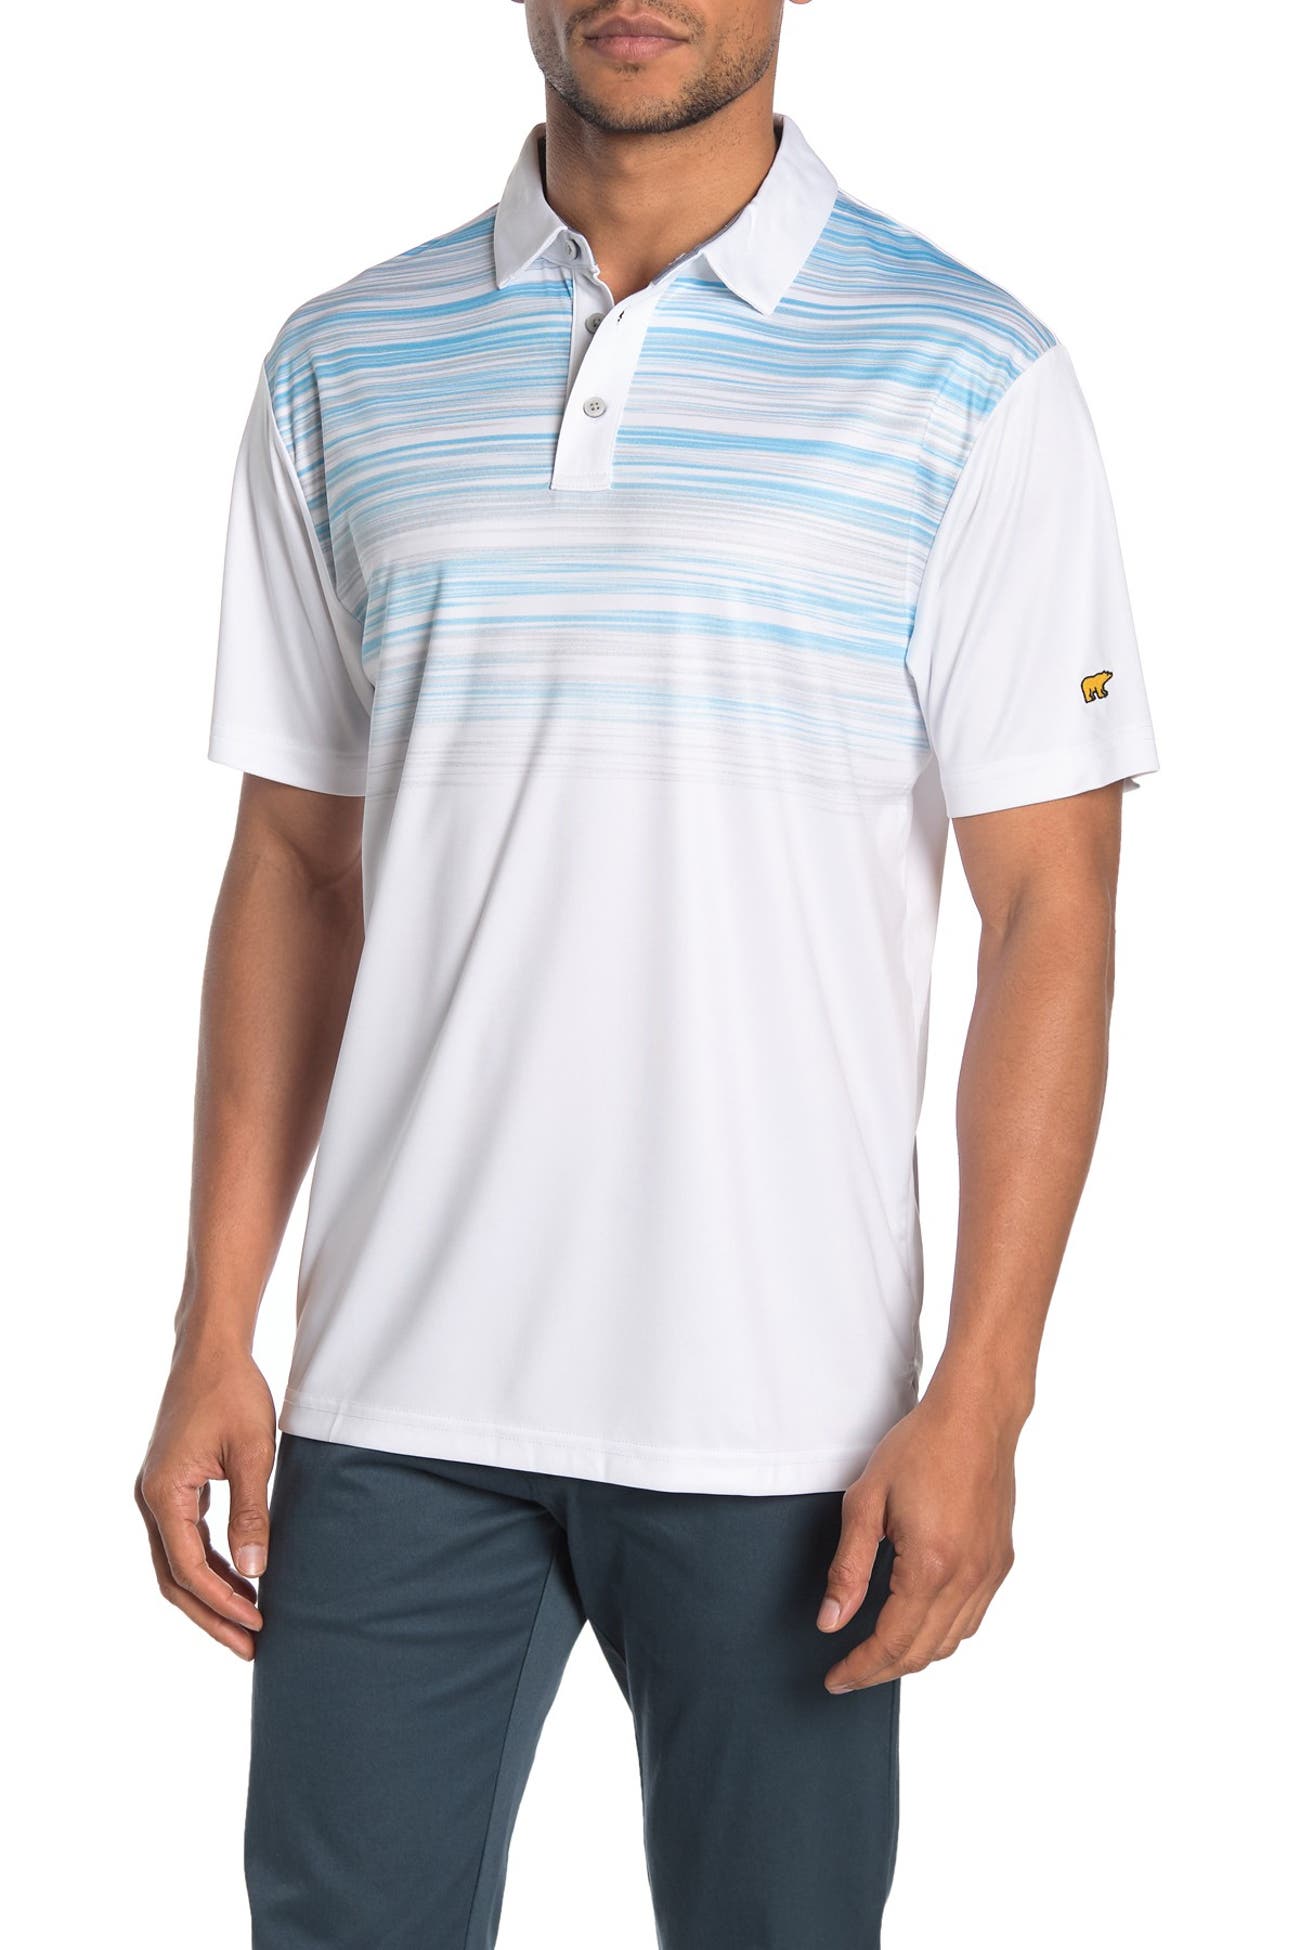 Jack Nicklaus | Rippled Water Print Performance Polo | Nordstrom Rack